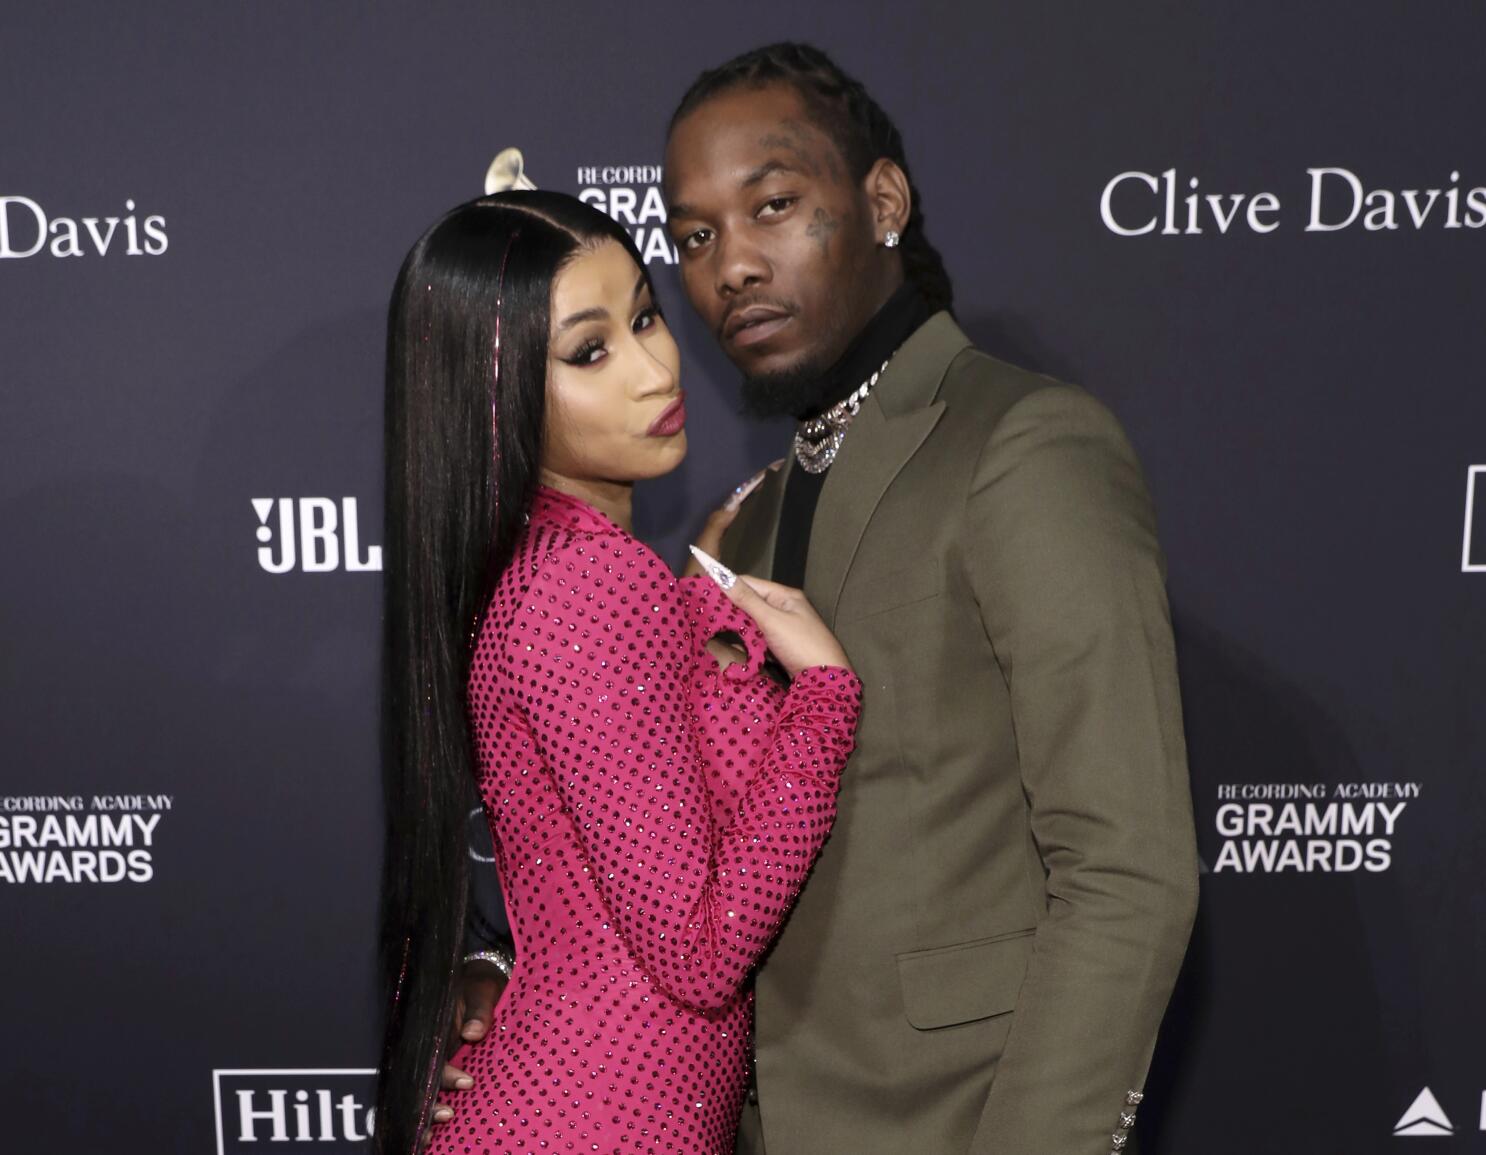 Cardi B and Offset split after months of cheating rumors - Los